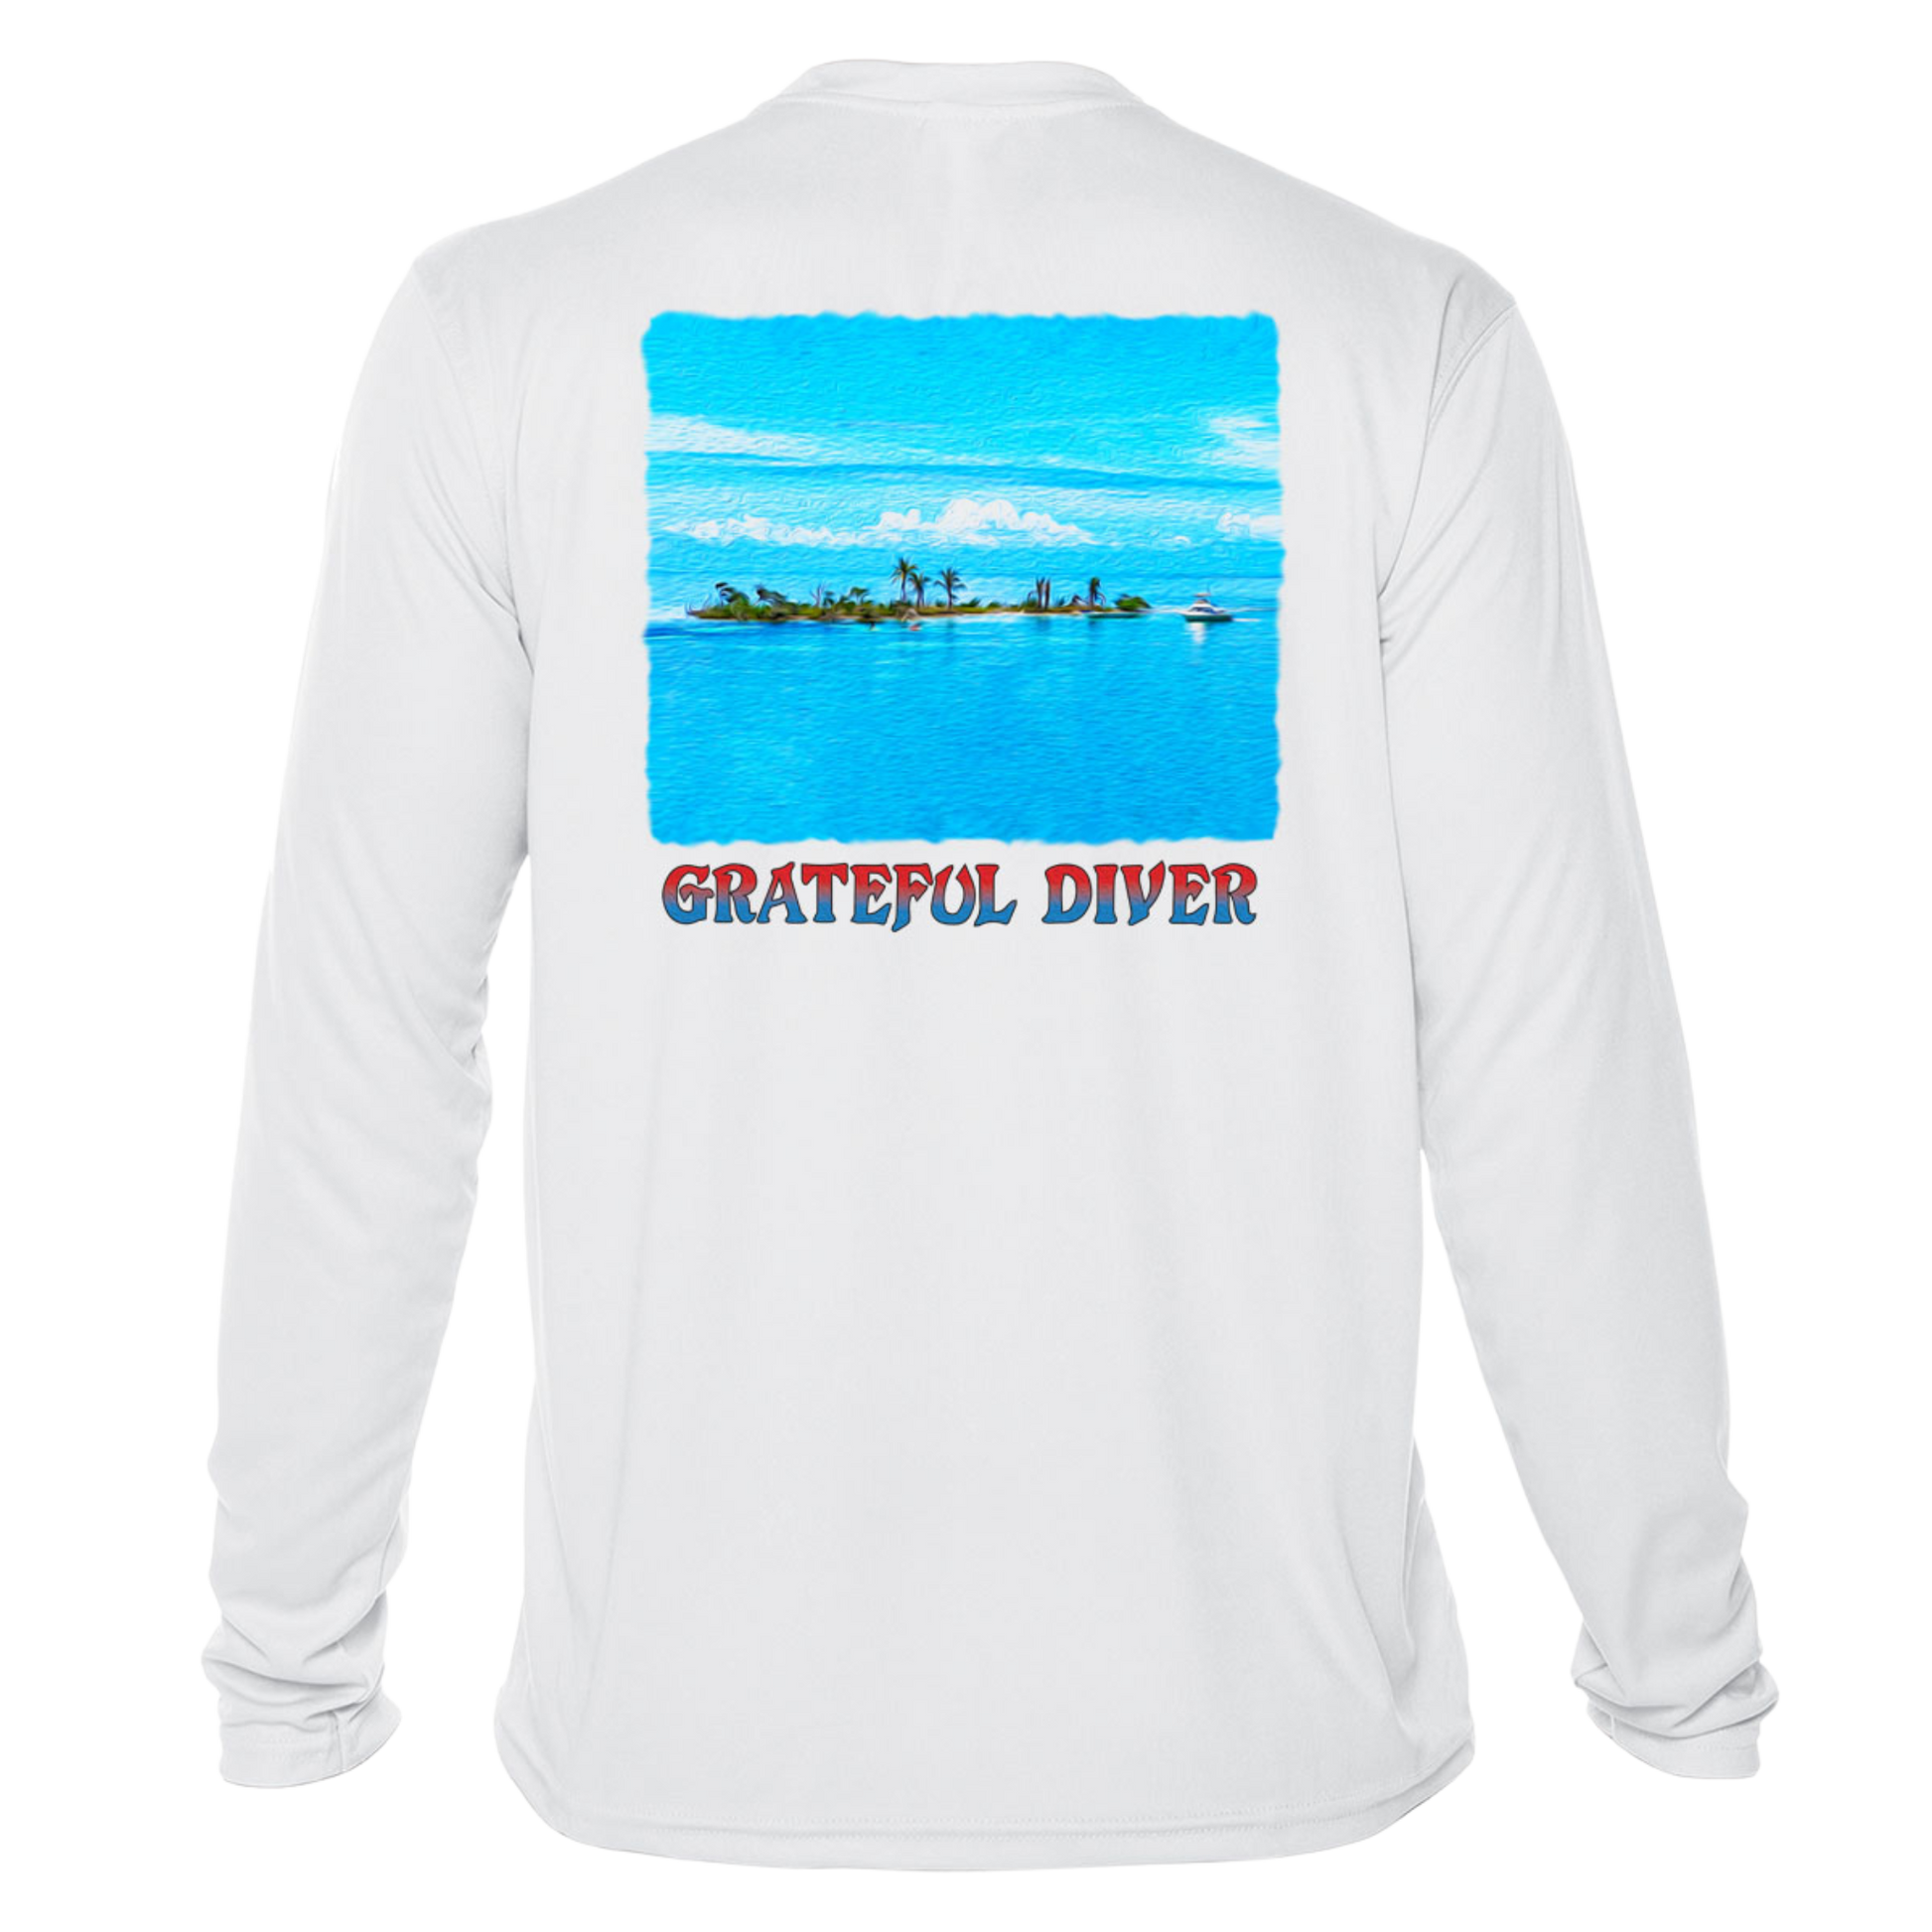 back of Grateful Diver's Artist's Collection: Island Life UV Shirt in white showing an island surrounded by blue water and sky